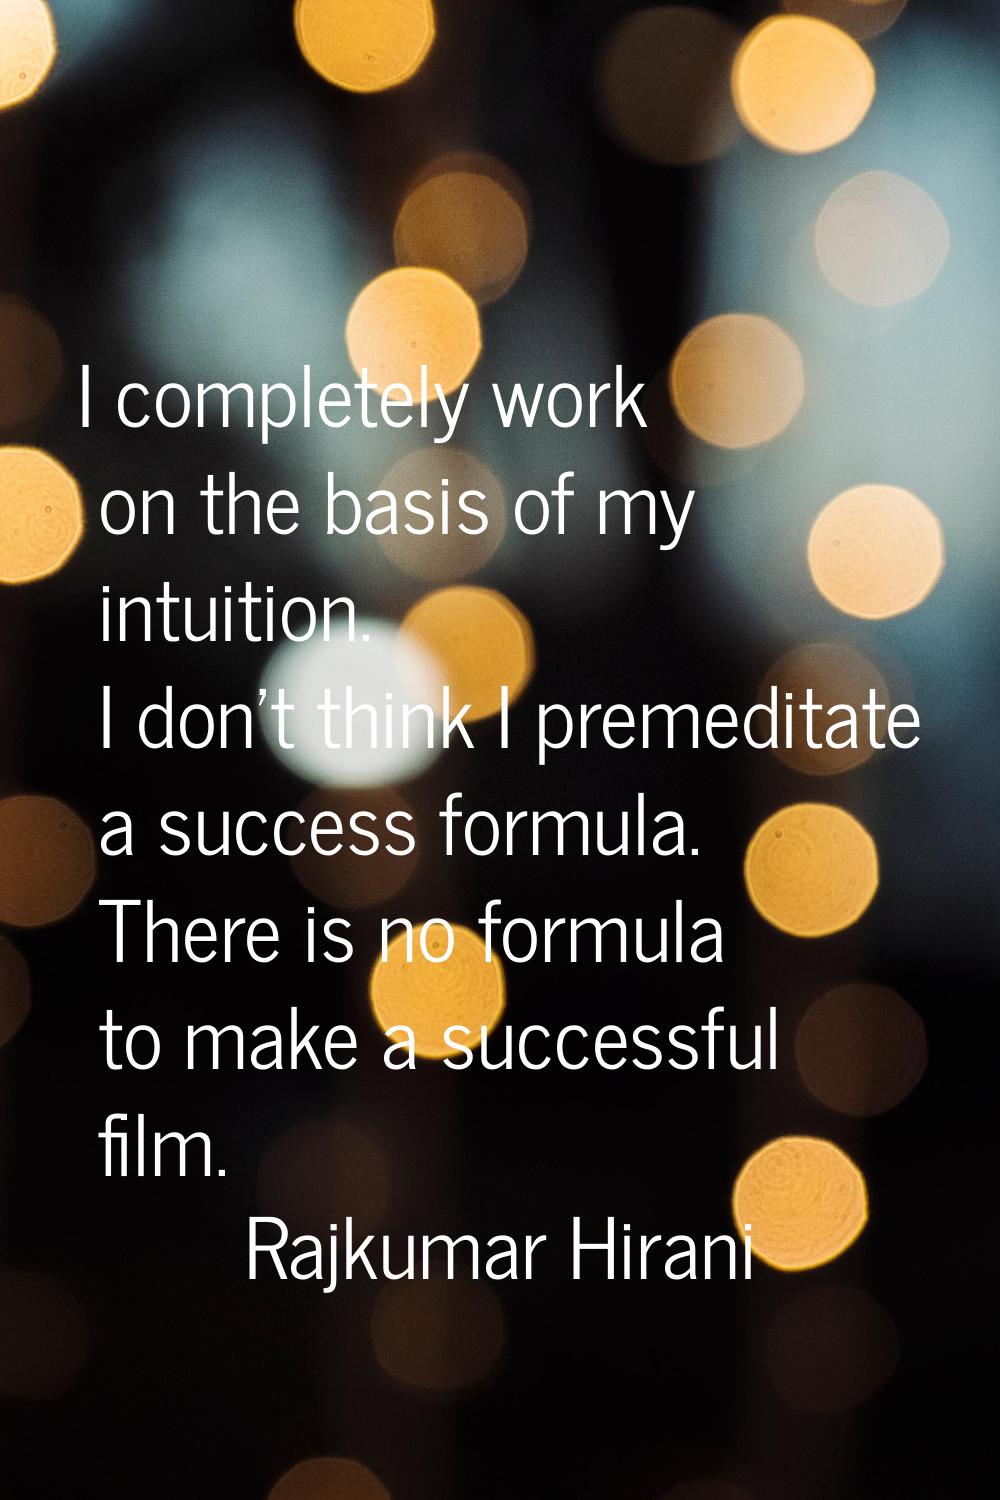 I completely work on the basis of my intuition. I don't think I premeditate a success formula. Ther